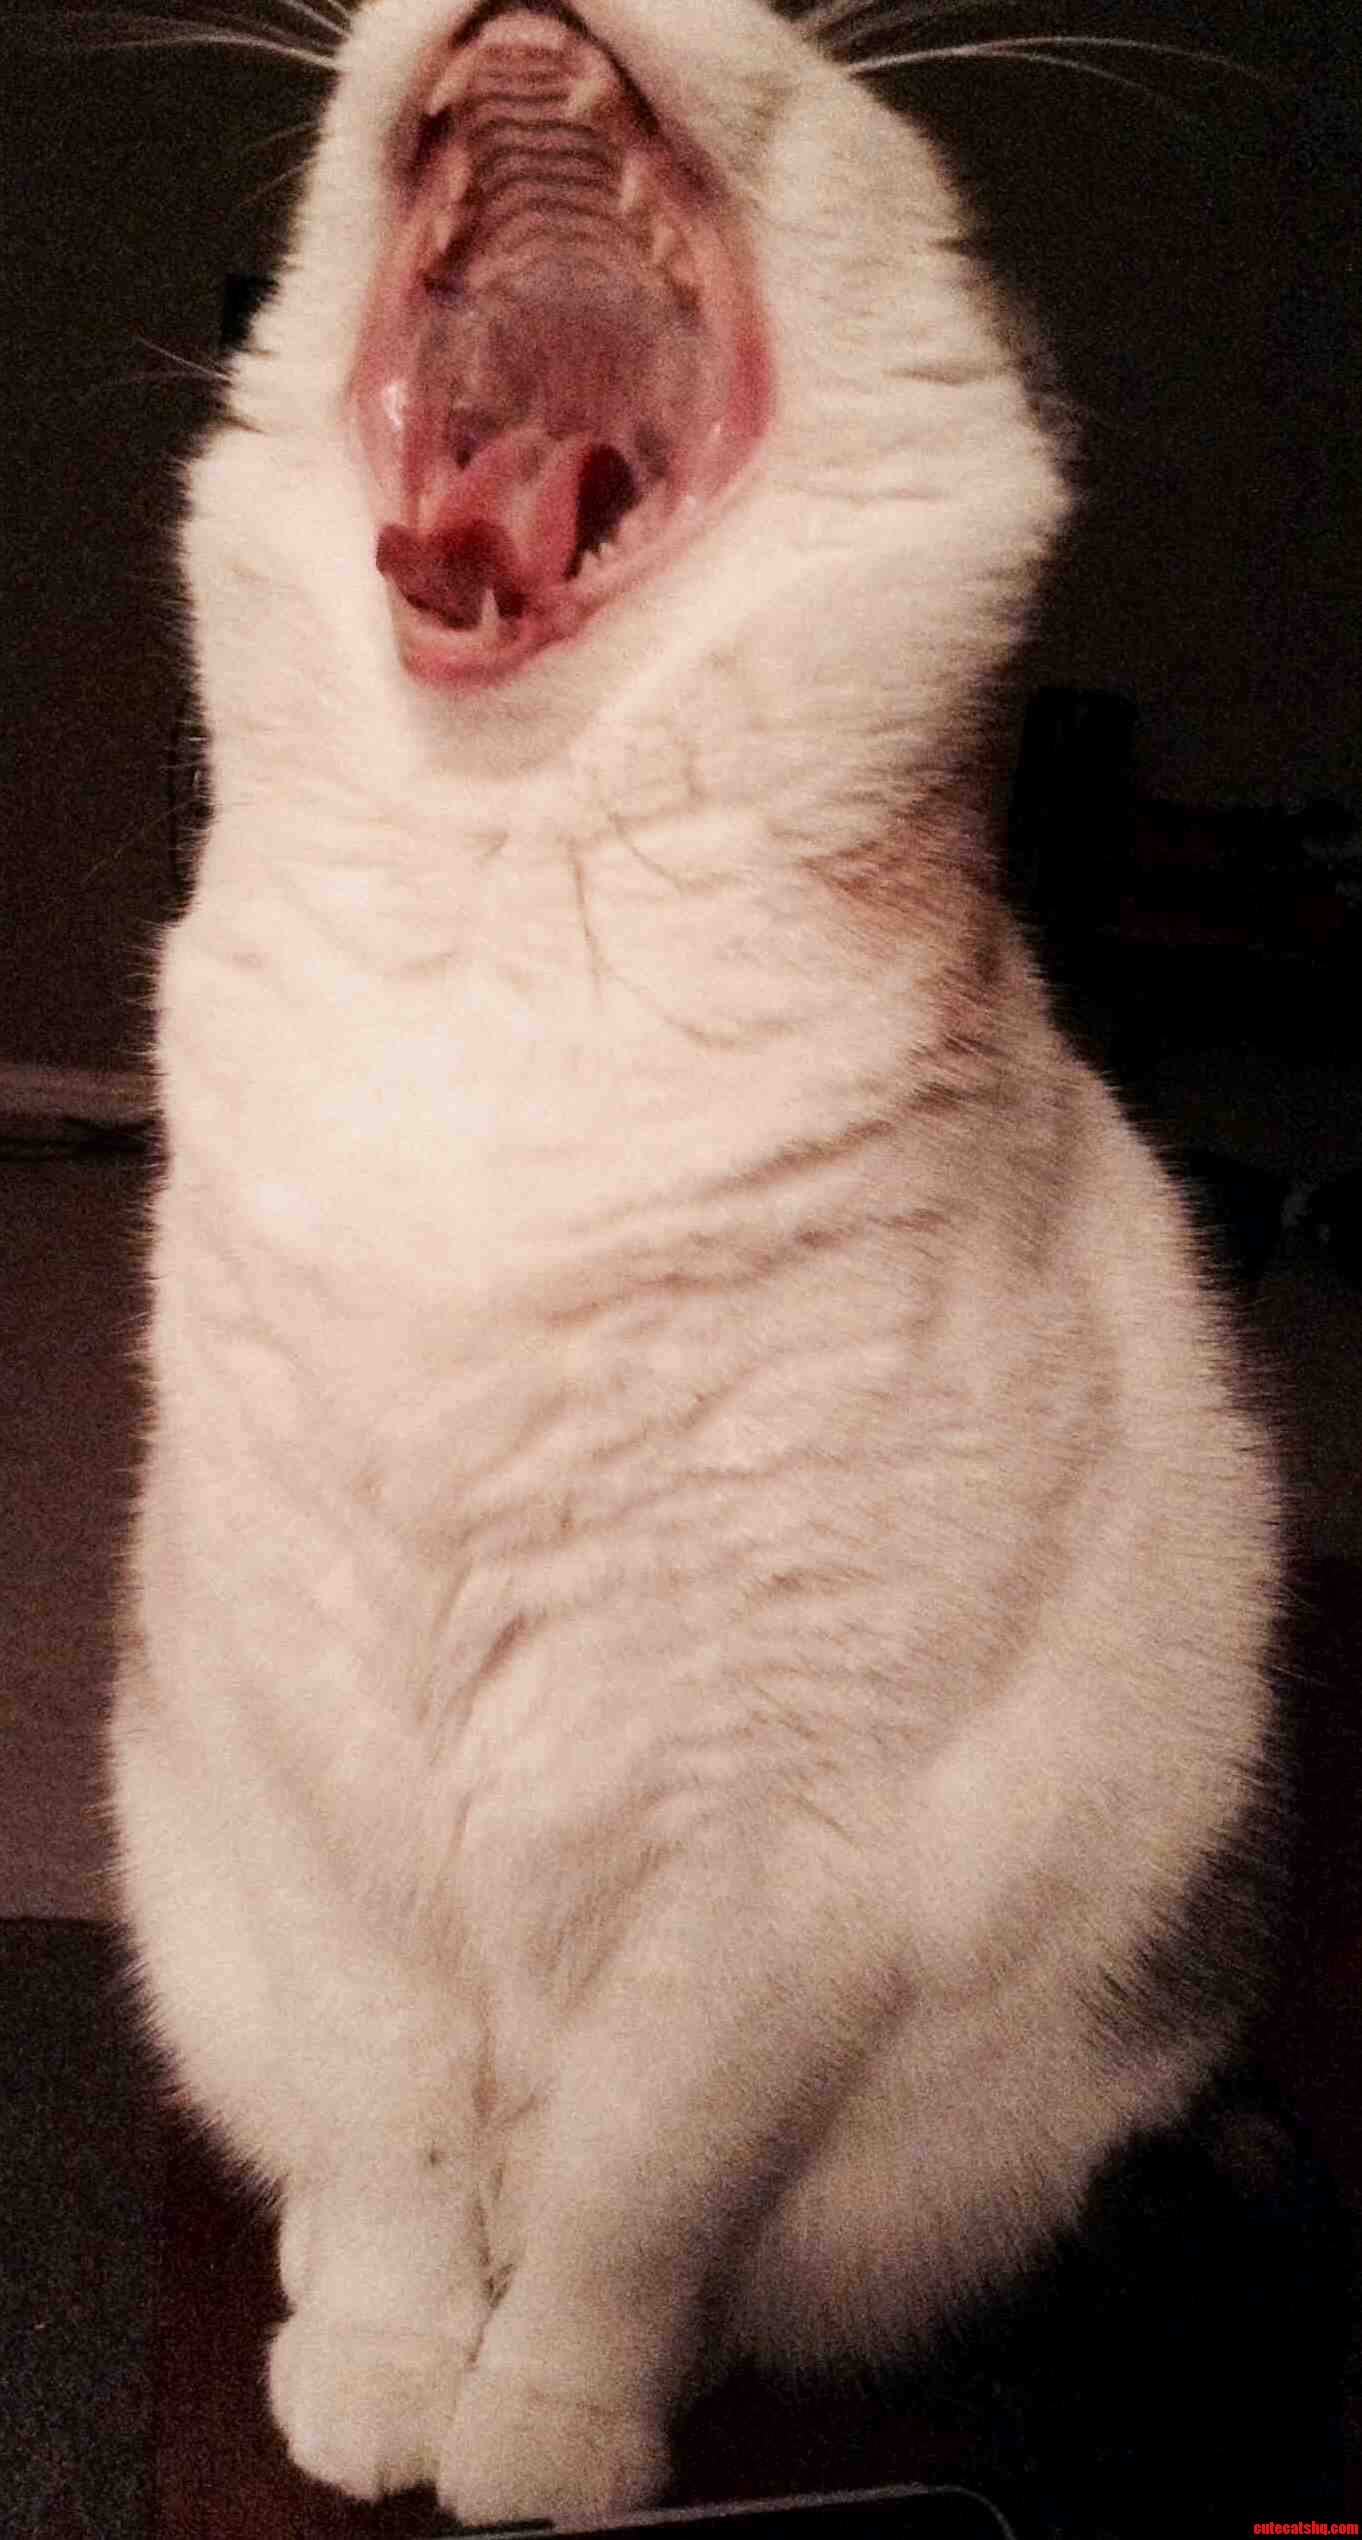 Caught Her In The Middle Of A Yawn.